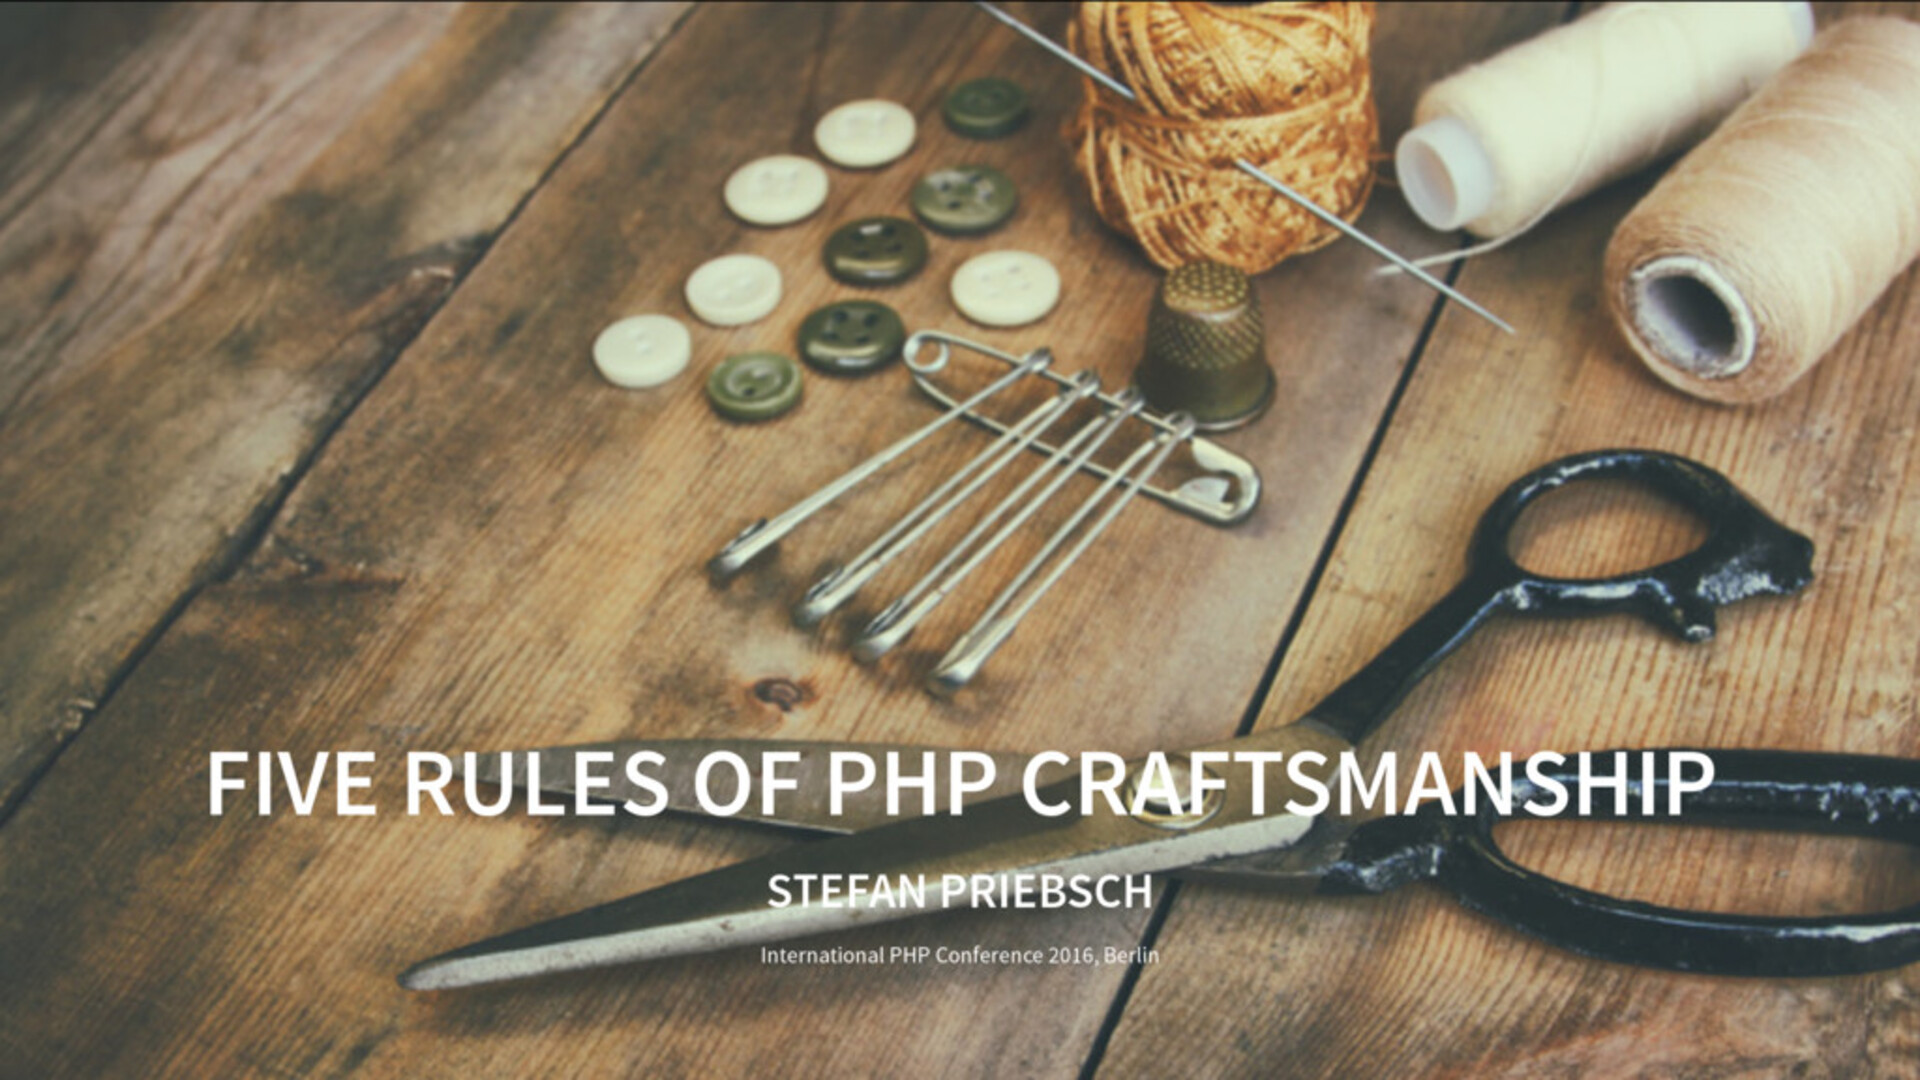 The Five Rules of PHP Craftsmanship